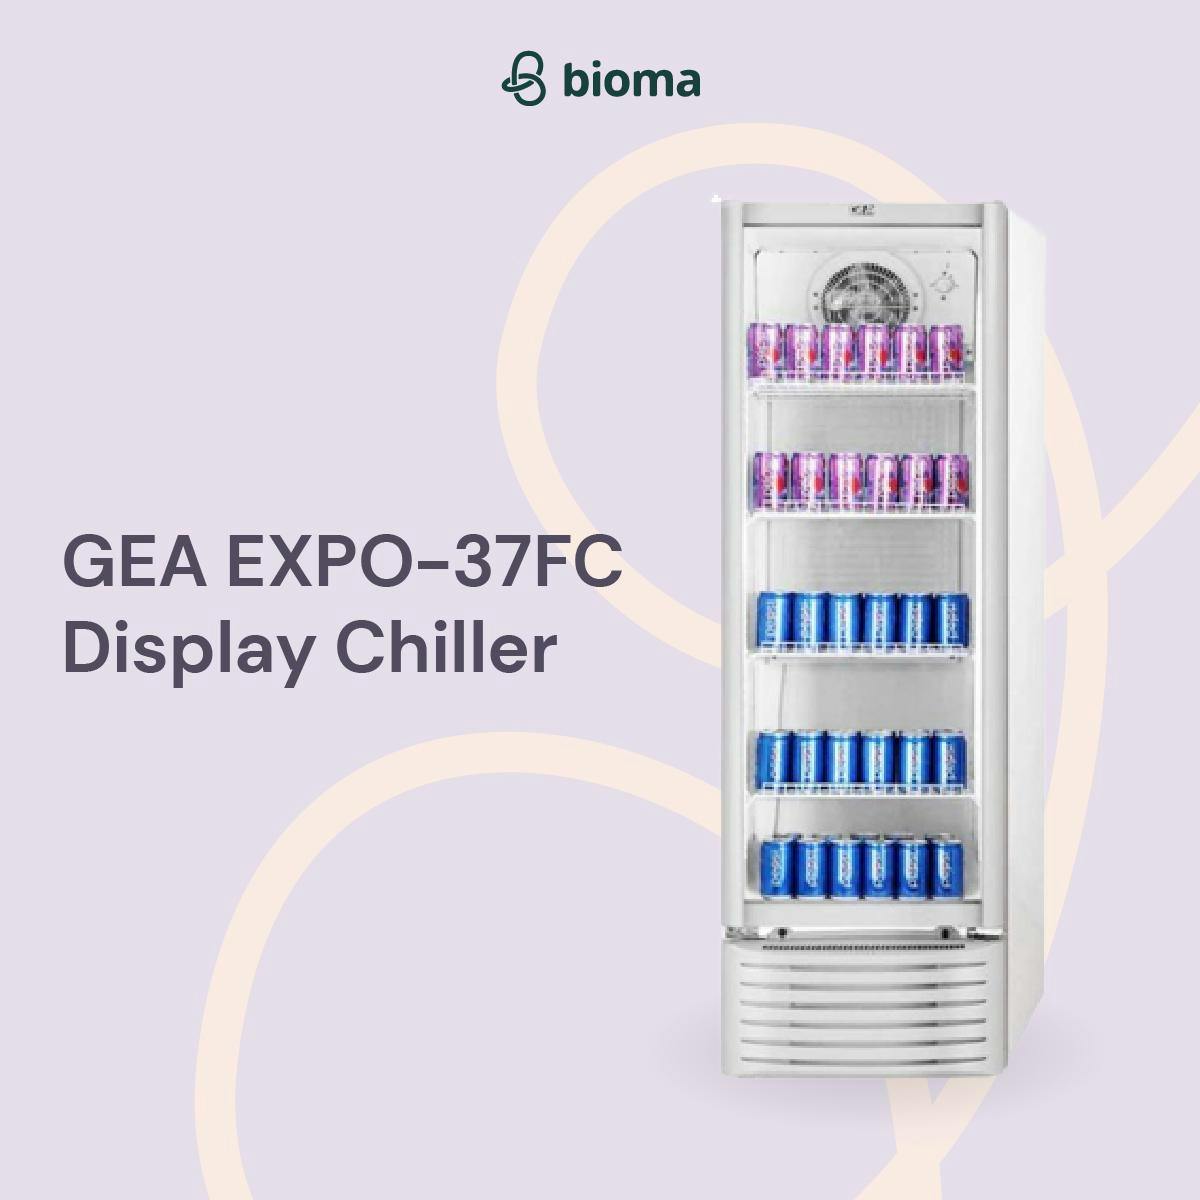 EXPO-37FC Display Chiller